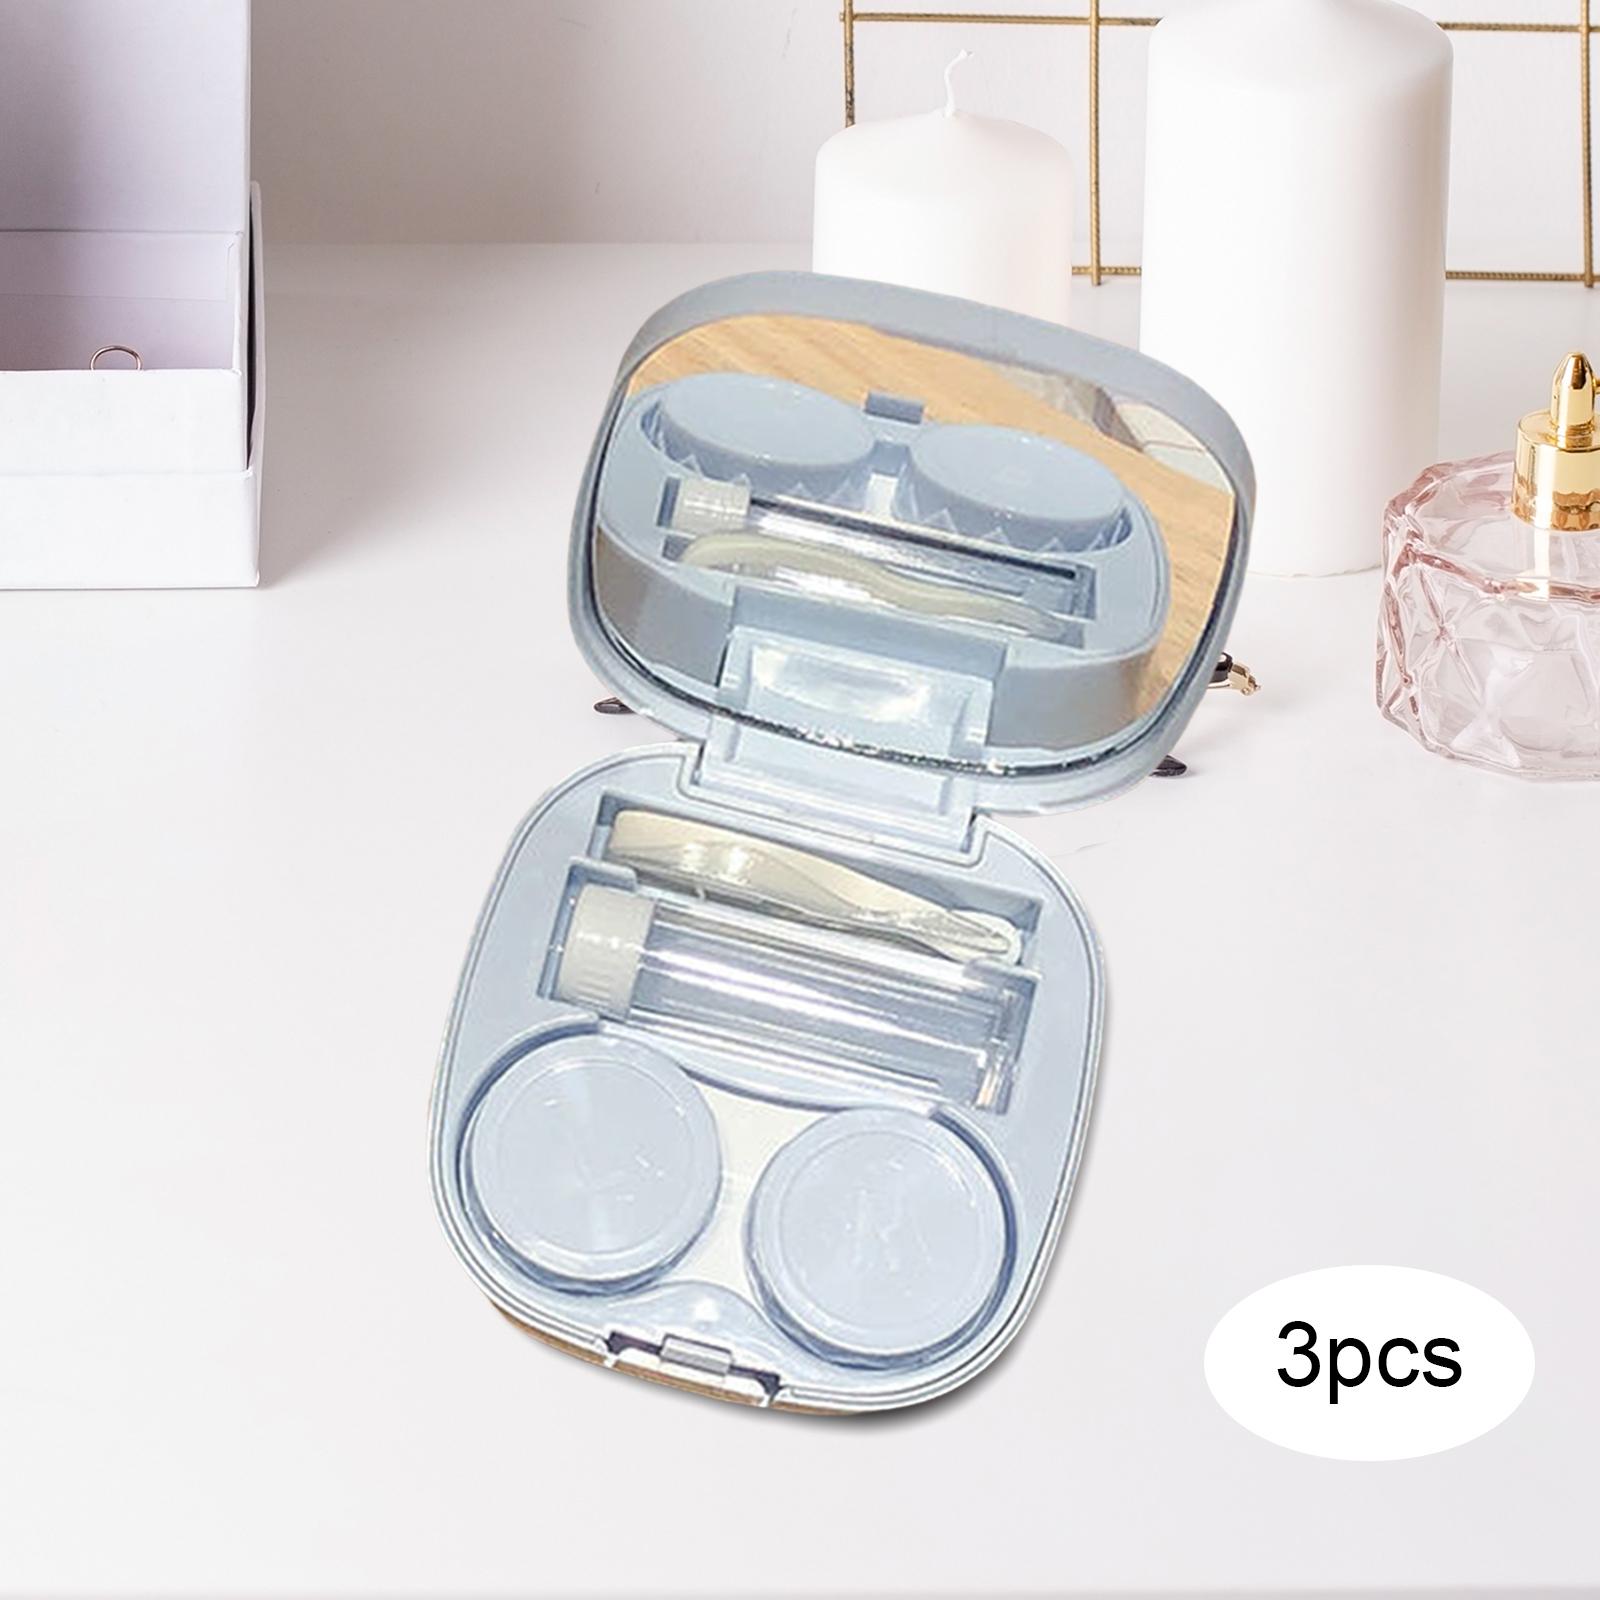 Pack of 3 Compact Contact Lens Case Kit with Mirror Durable Convenient Small Blue